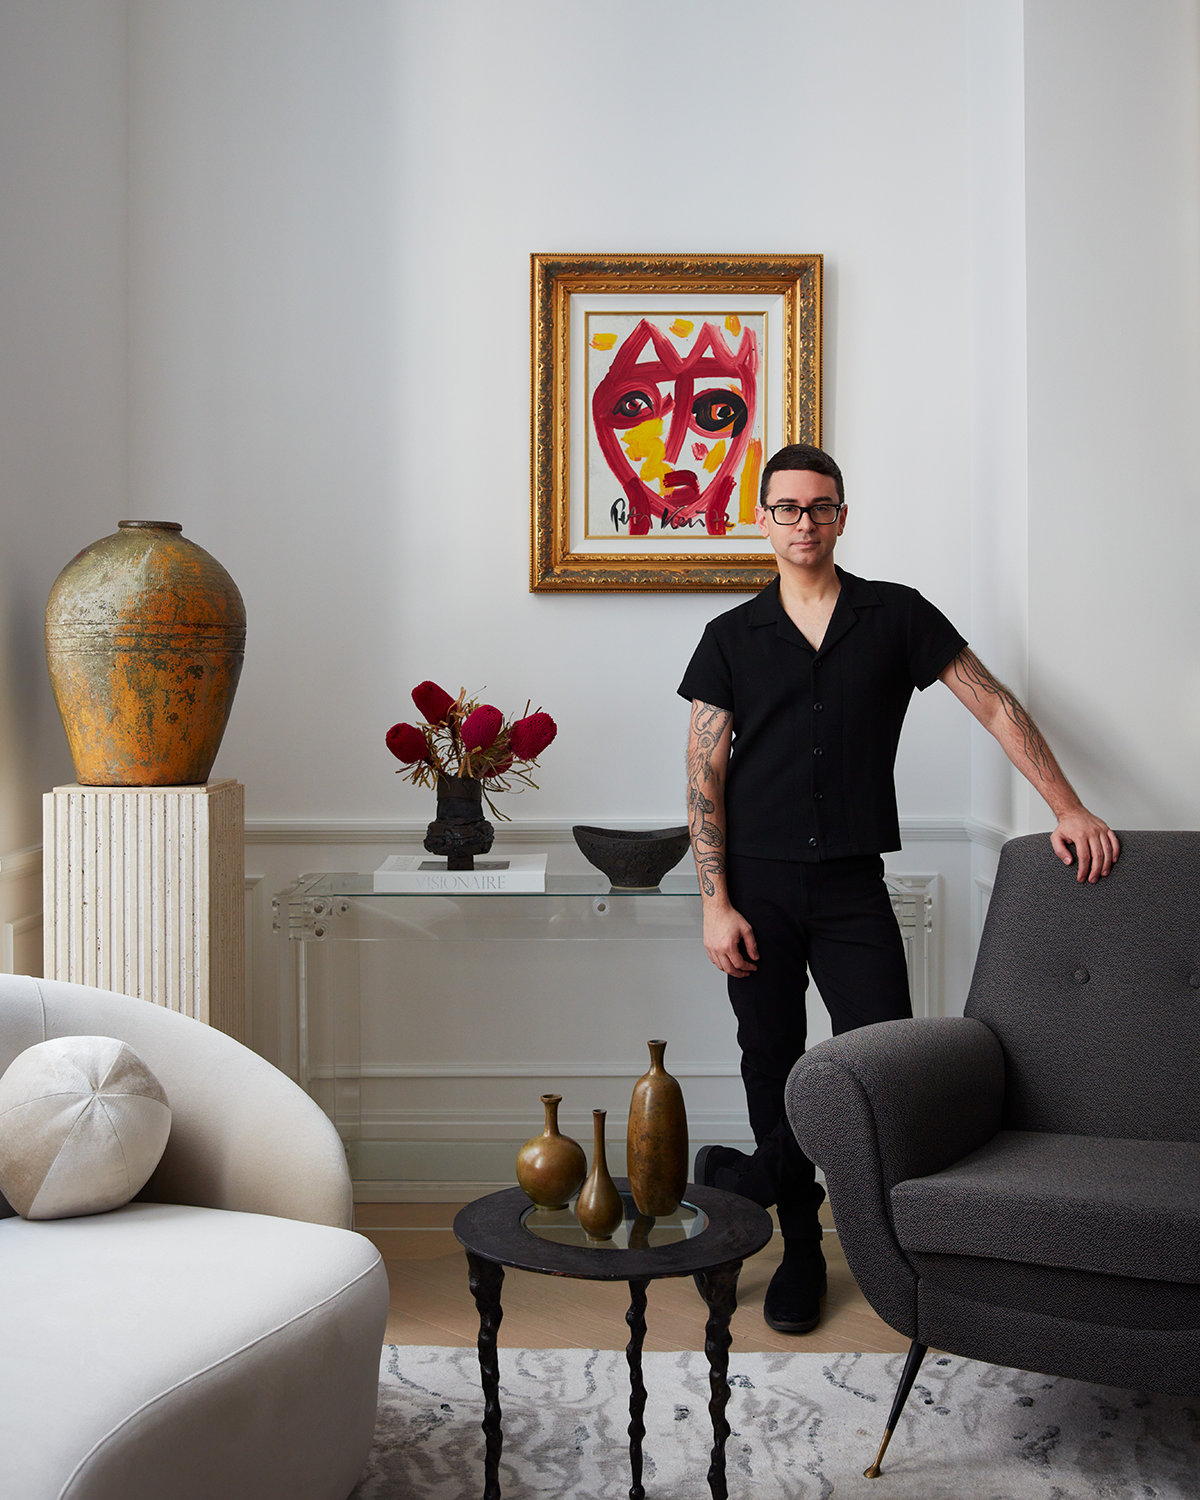 Christian Siriano’s New York Apartment Has 14 Chairs and a Whole Lot of Vintage Treasures